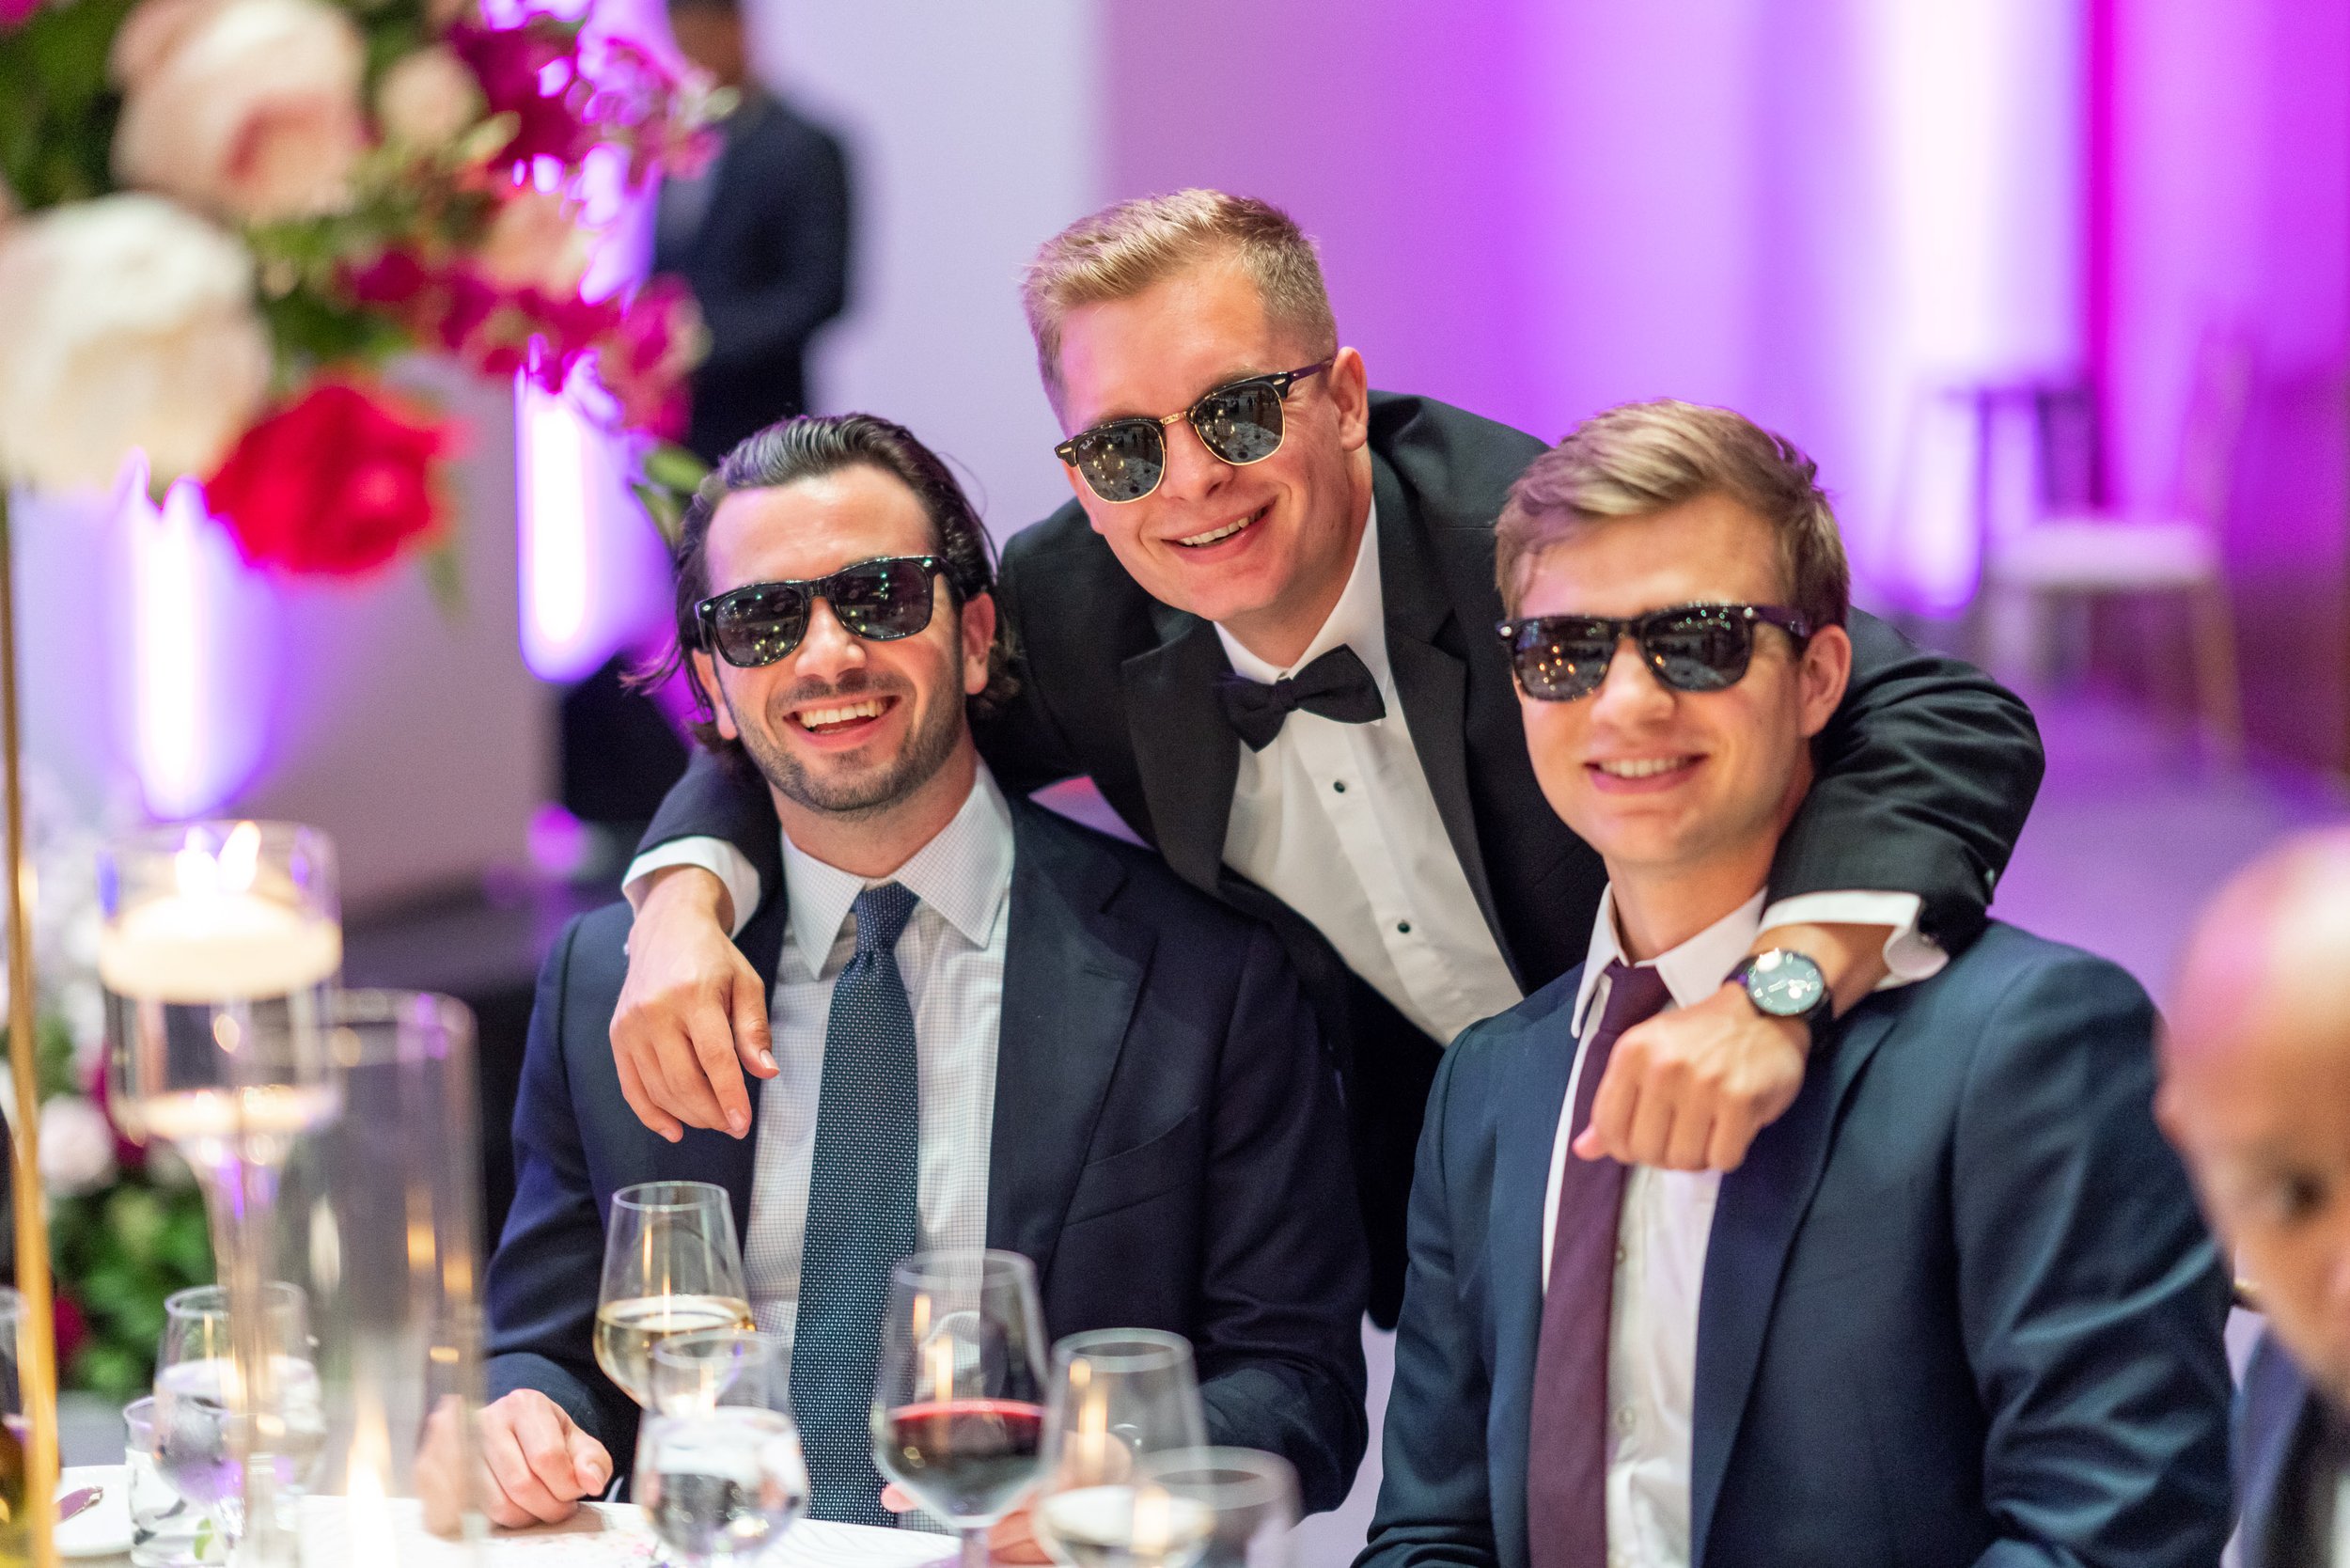 Three wedding guests laugh and smile for camera in sunglasses at wedding reception candids